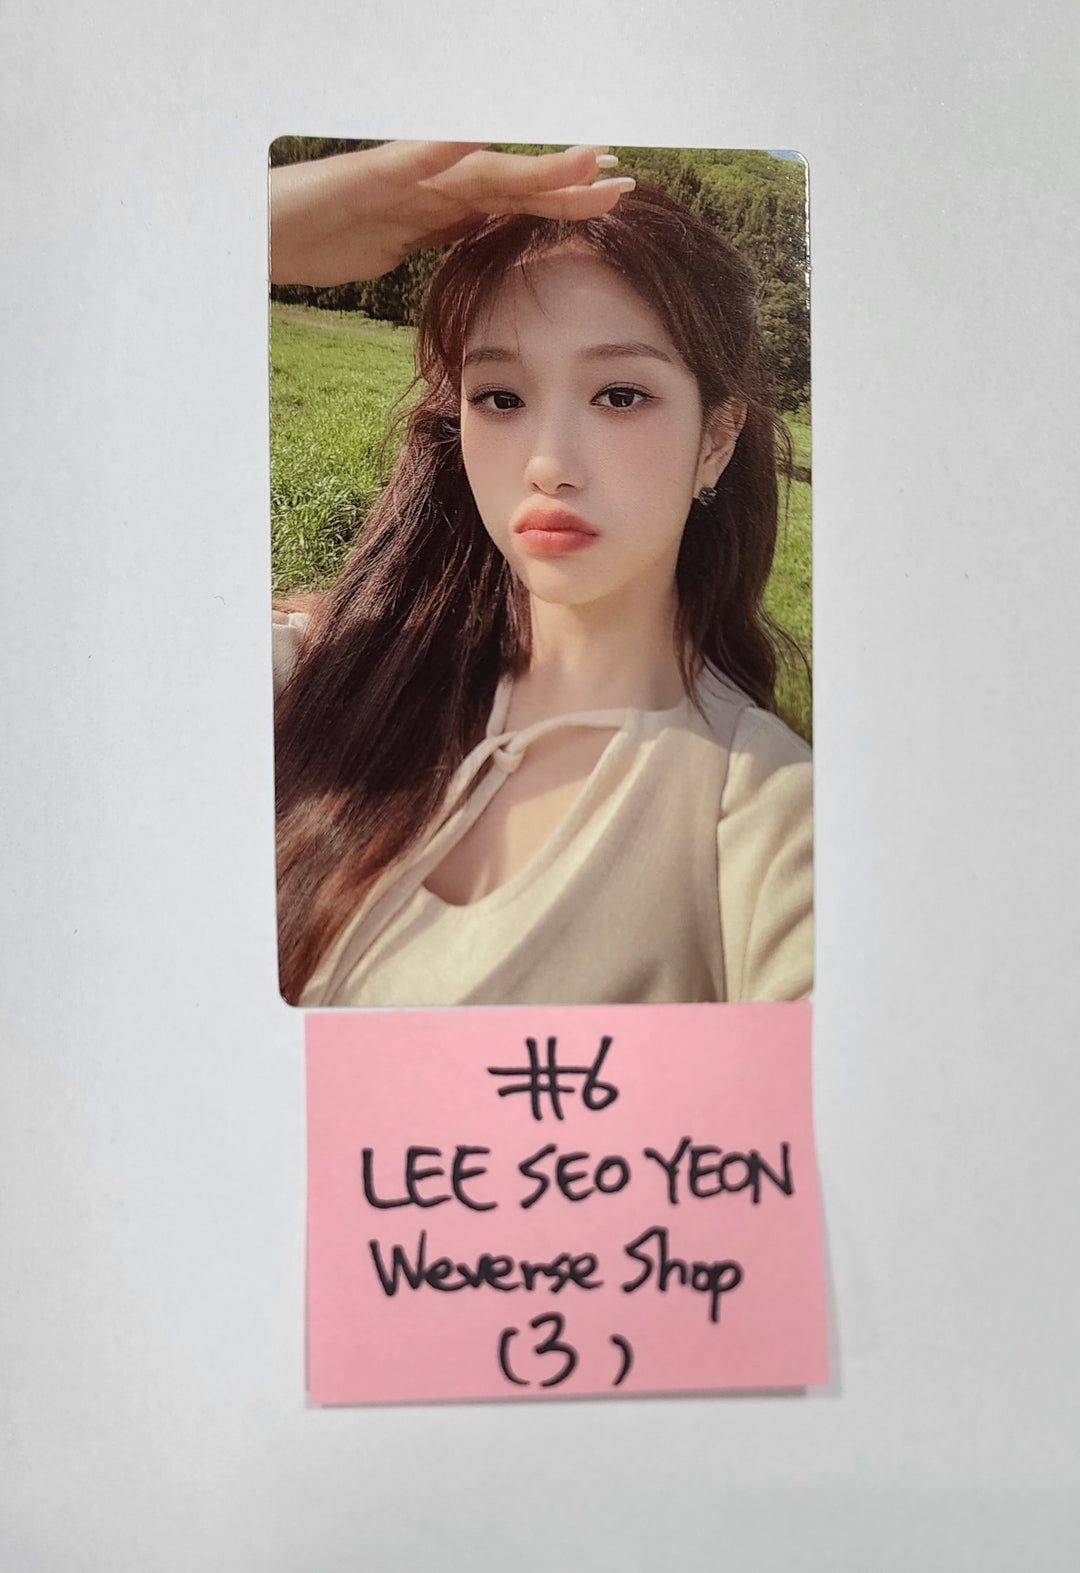 Fromis_9 "from our Memento Box" - Weverse Shop 예약판매 혜택 포토카드